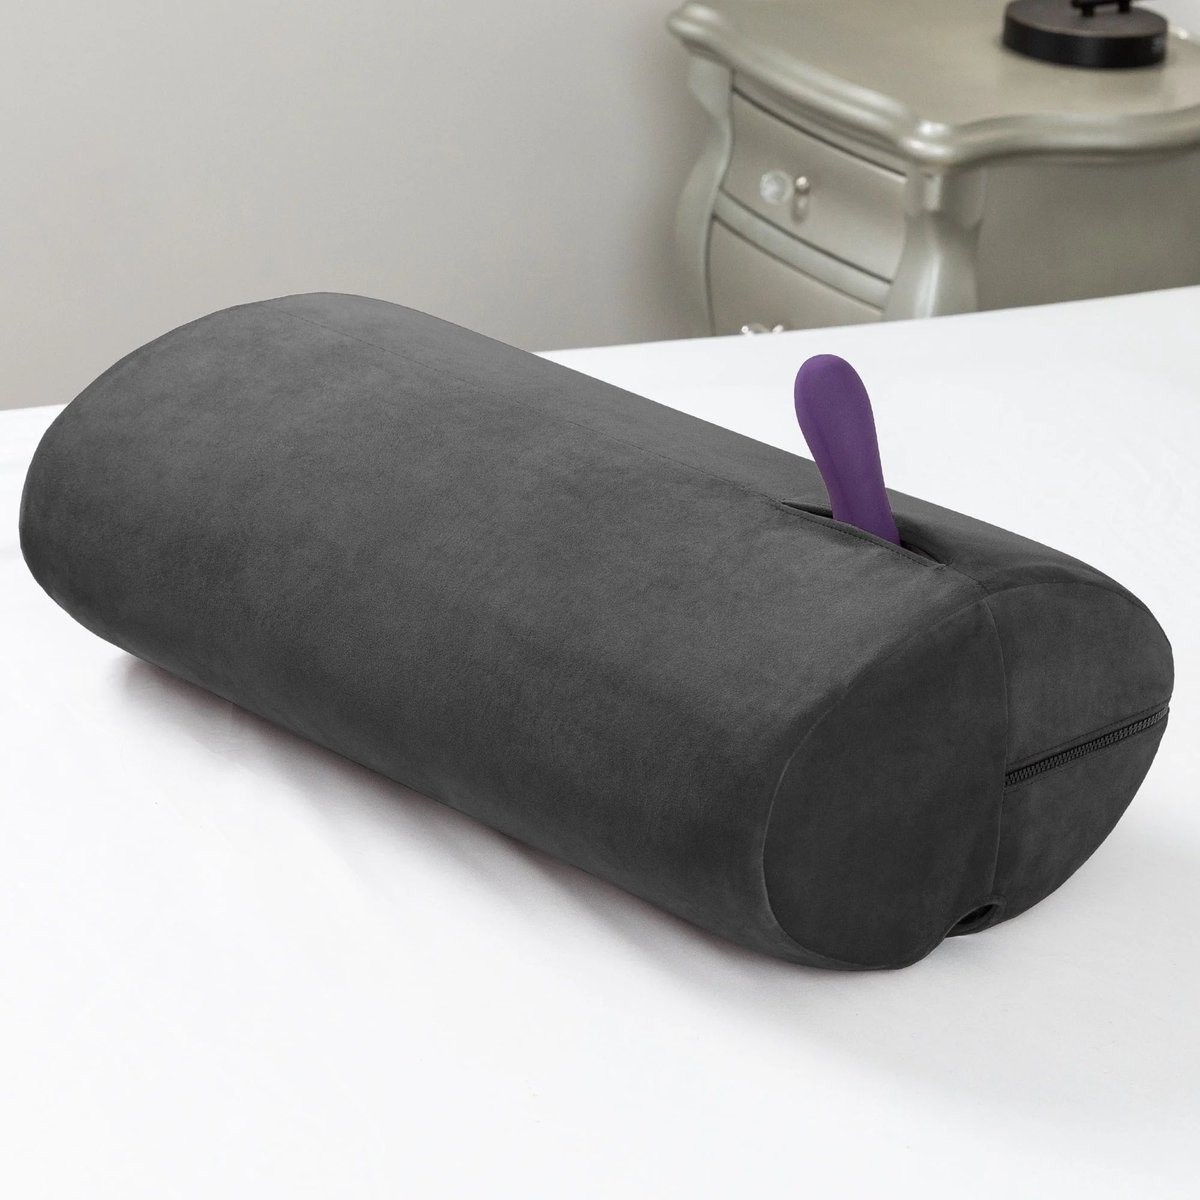 Meet your new best friend! 🐱✨ Introducing the Wing Toy Mount in sleek Black Microvelvet – the purr-fect accessory for endless playtime fun! 👉 ohsensa.com/products/wing-…

 #PlaytimeEssentials #giftforher #ohsensa #bedtimeroutine #bodyhealth #massagetherapy #solo #bedaccessories